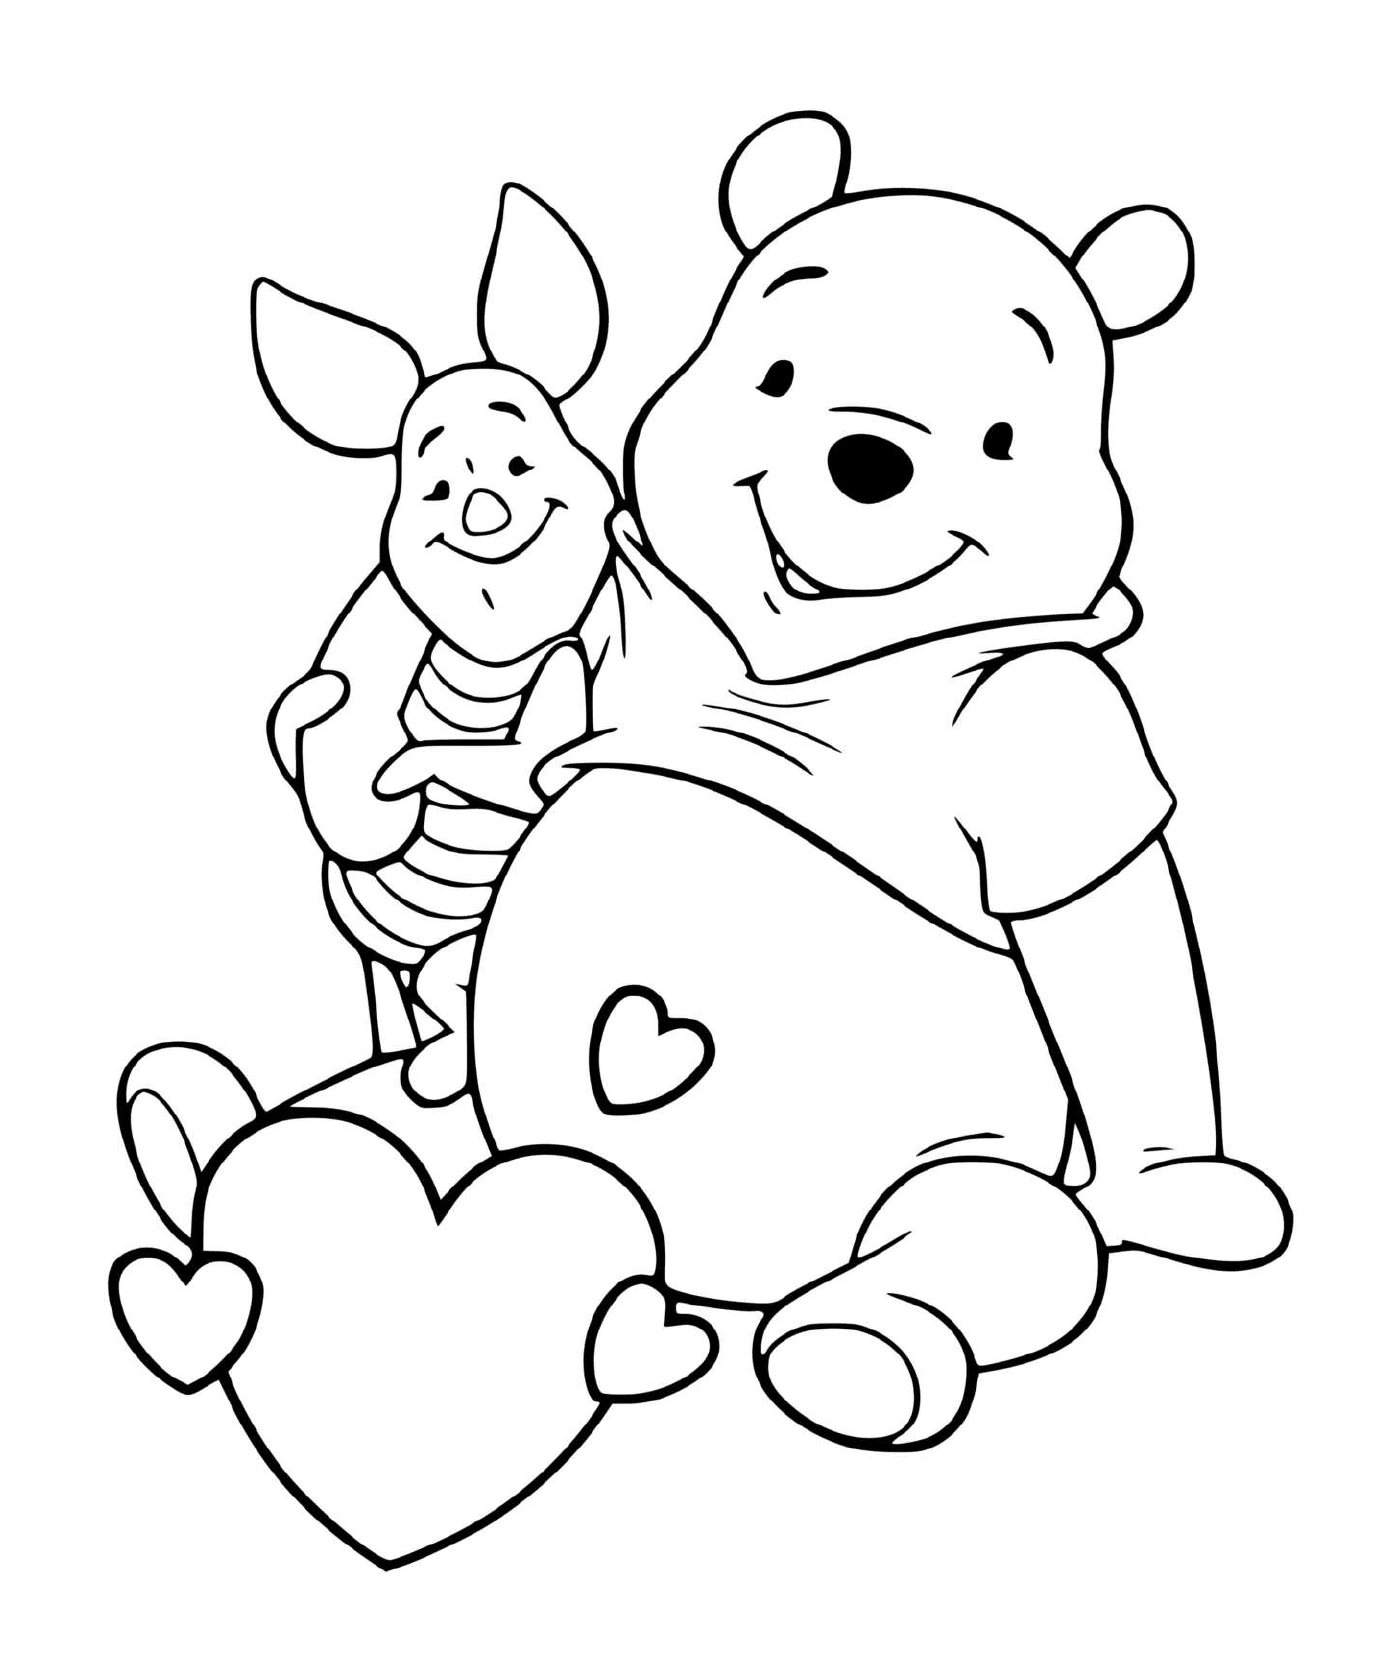  Winnie the bear and Porcinet, best friends 